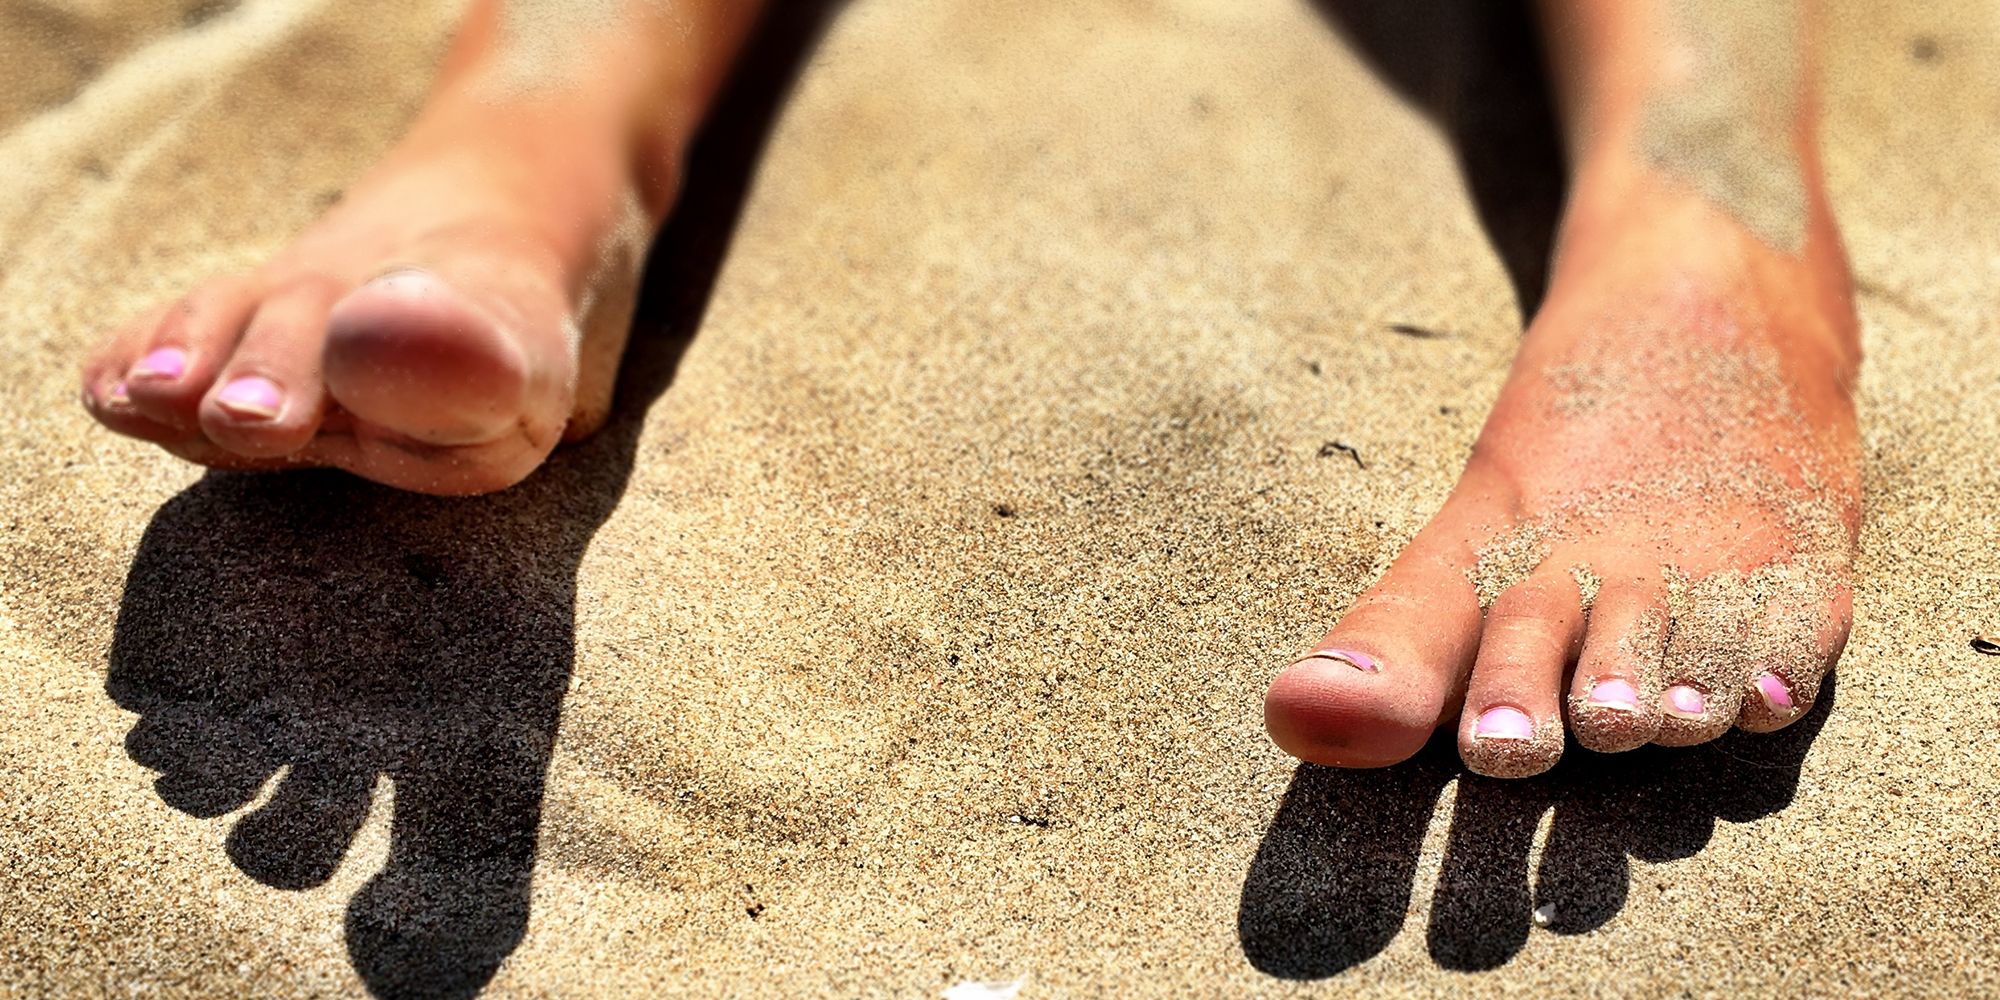 The gross reason you should be careful walking barefoot on the beach